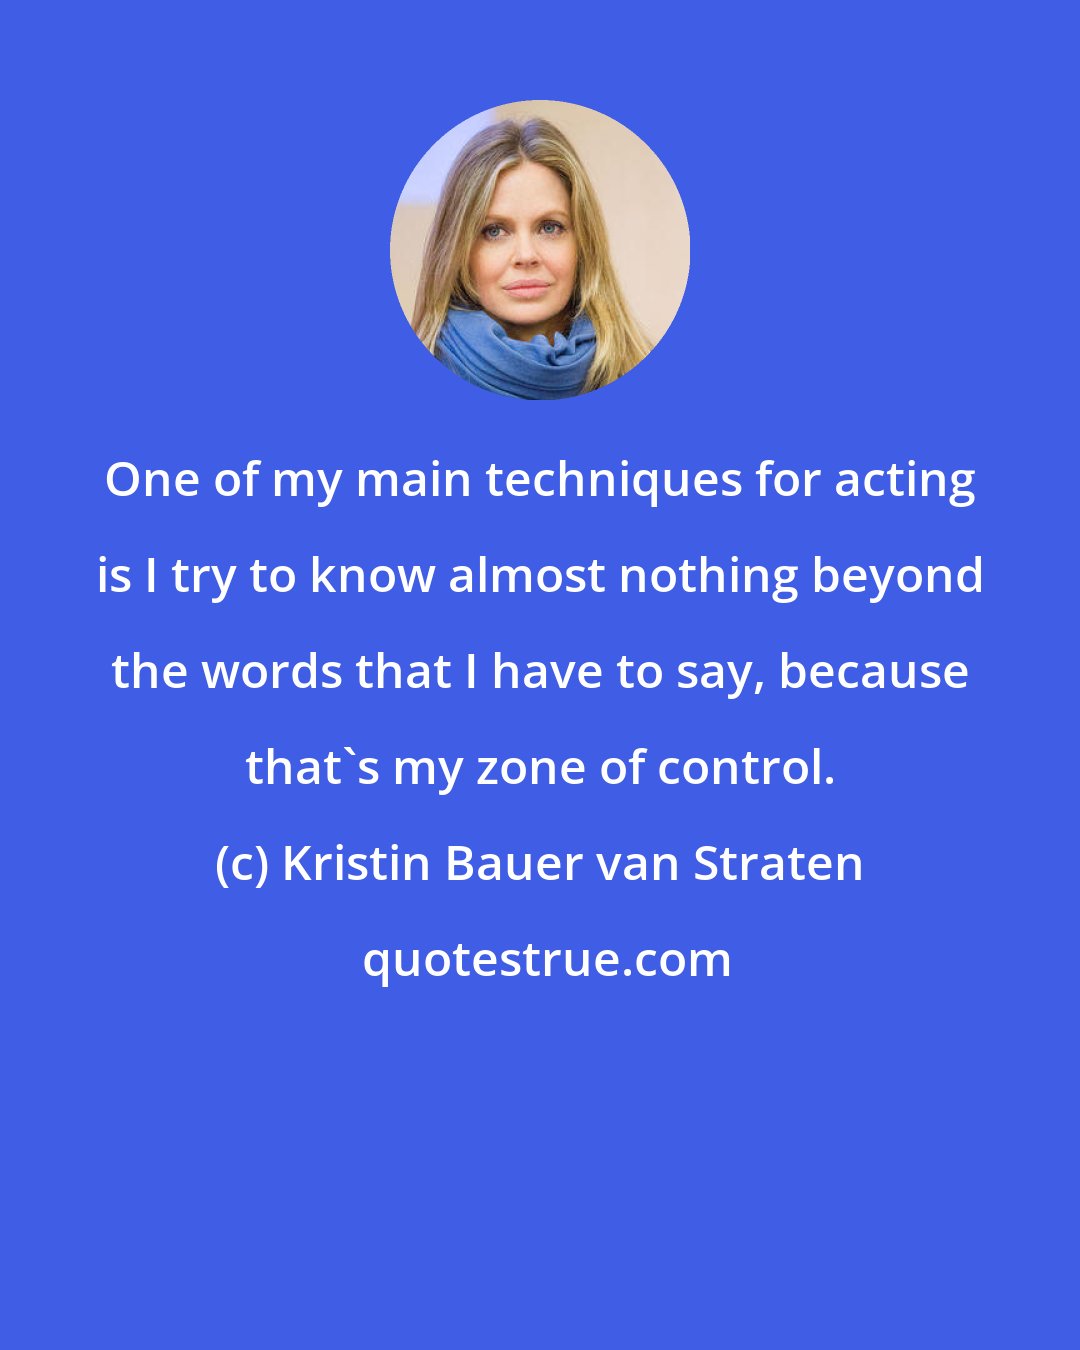 Kristin Bauer van Straten: One of my main techniques for acting is I try to know almost nothing beyond the words that I have to say, because that's my zone of control.